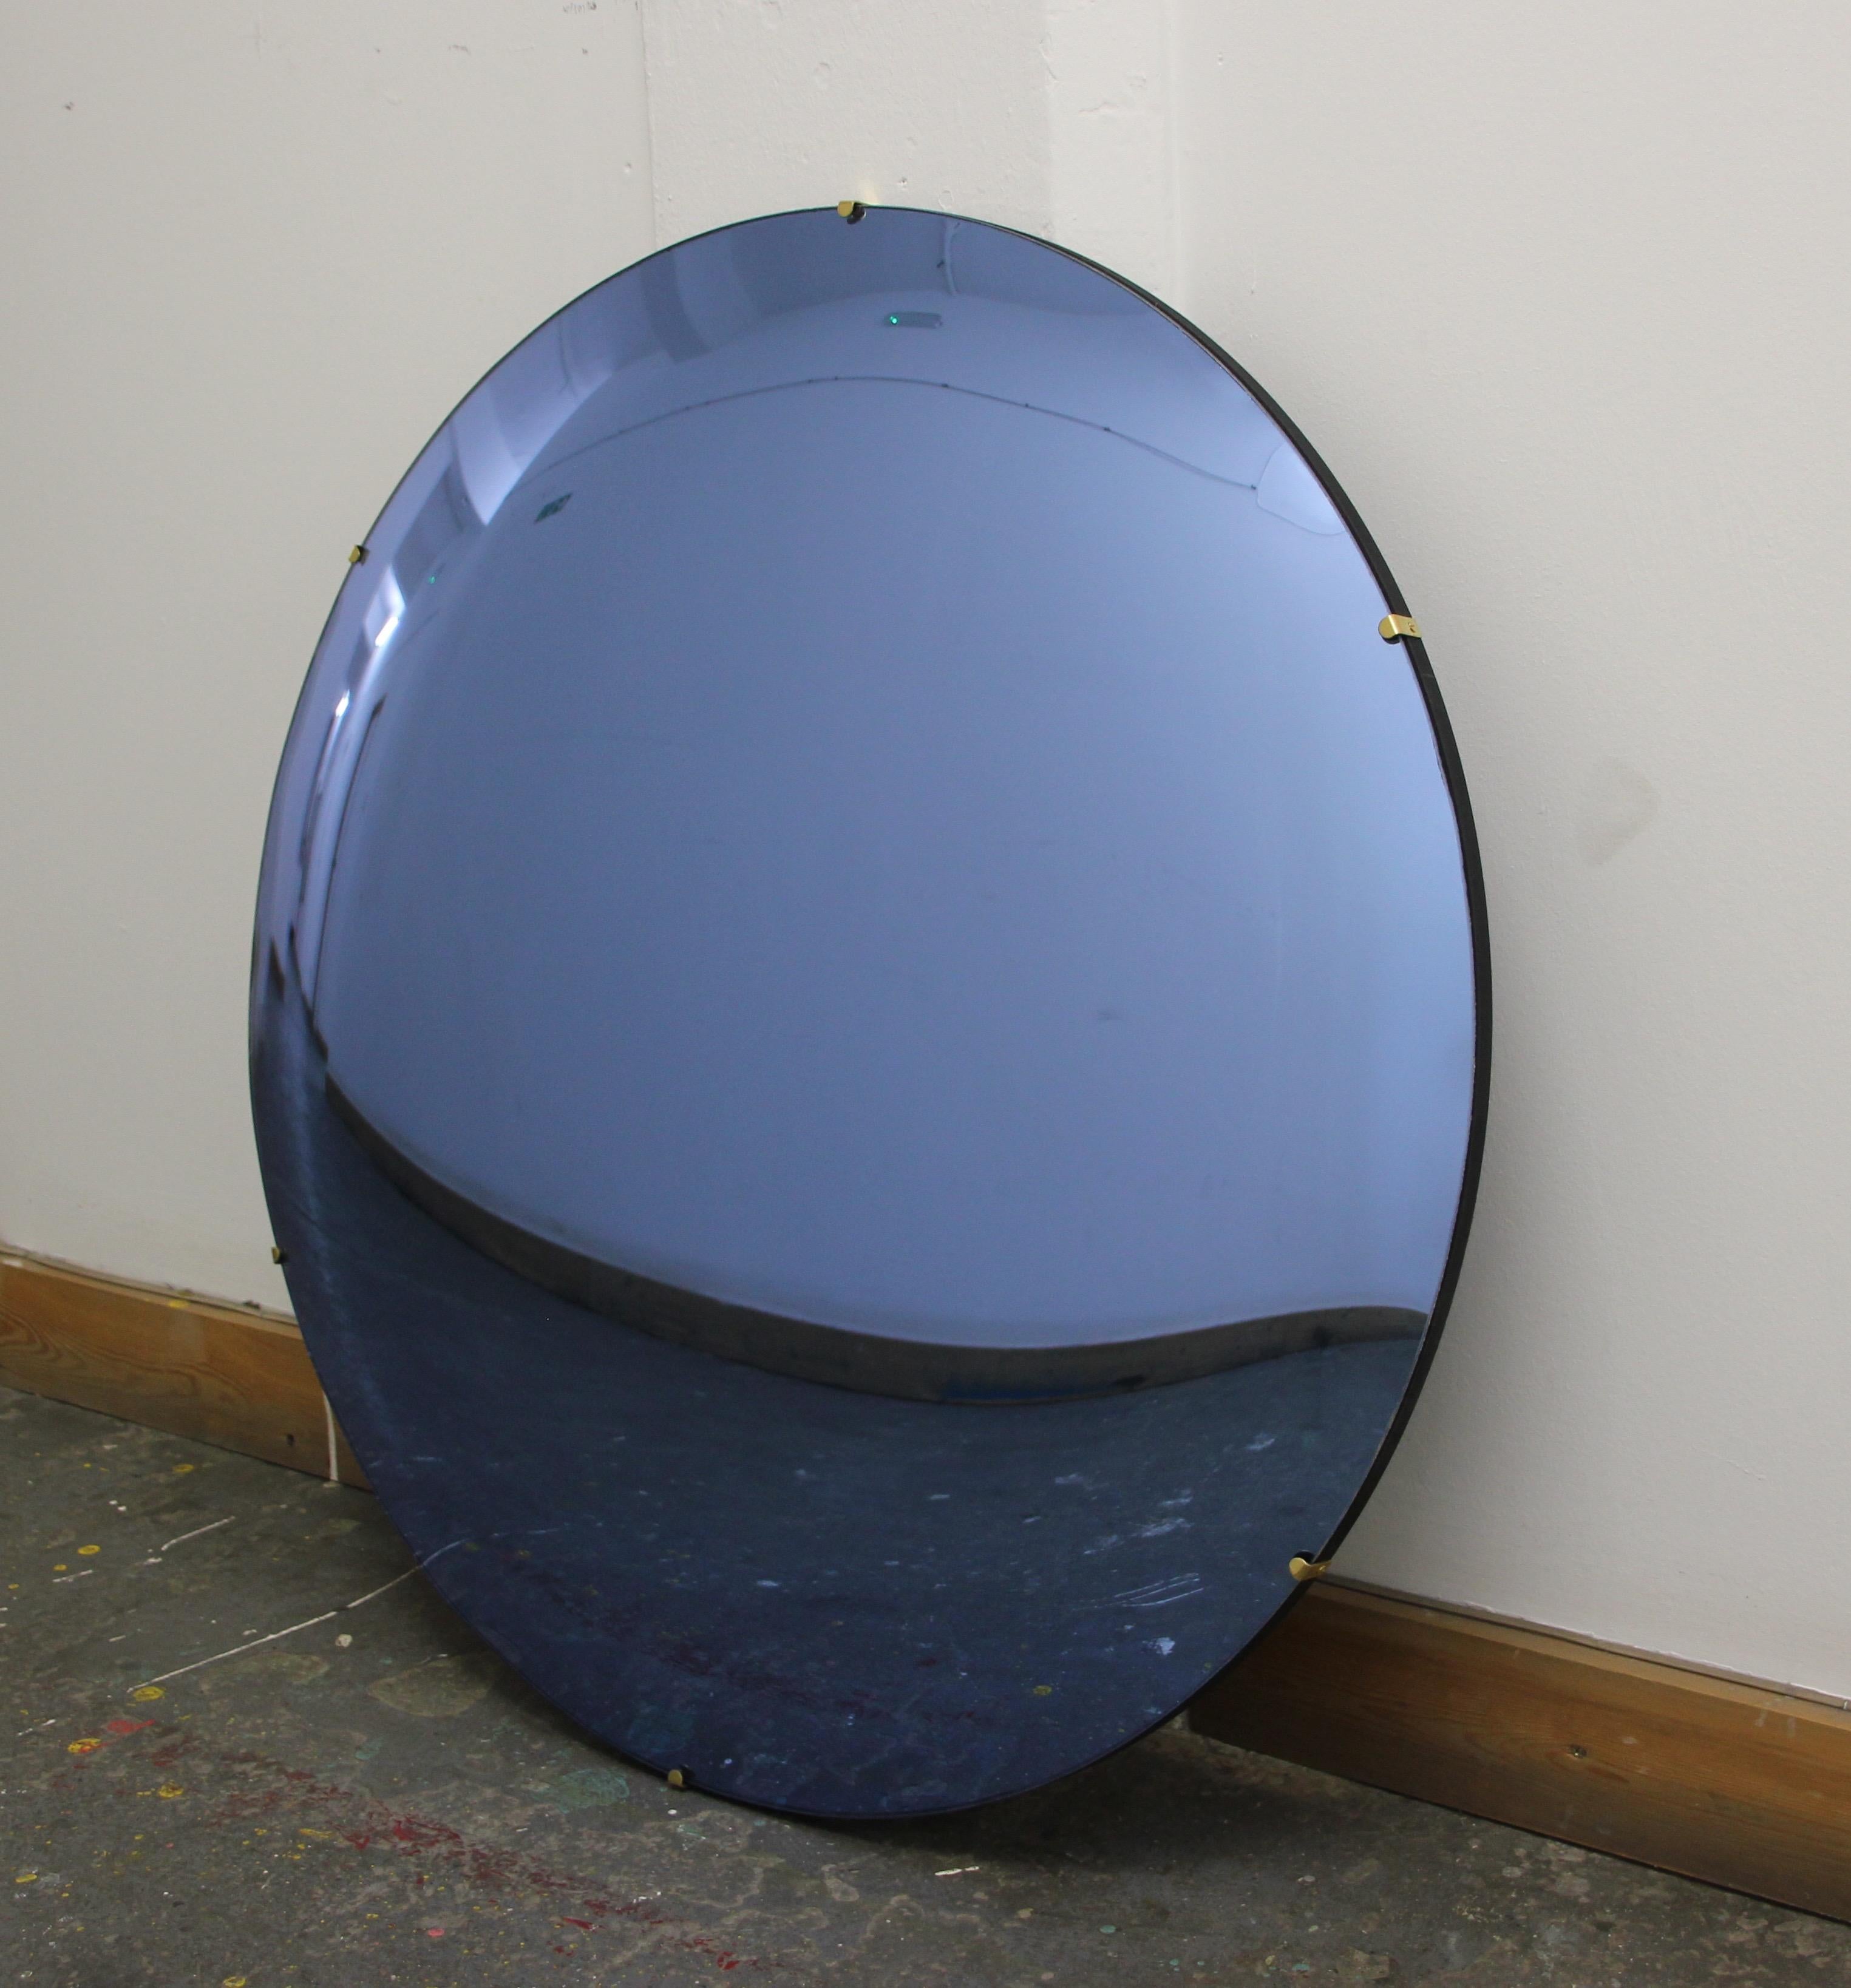 Stunning frameless black convex mirror for a unique statement in a home, hospitality or commercial space.

Each Orbis convex mirror is handcrafted. Slight variations in dimensions, tint and finish are characteristics of such handcrafted work. These